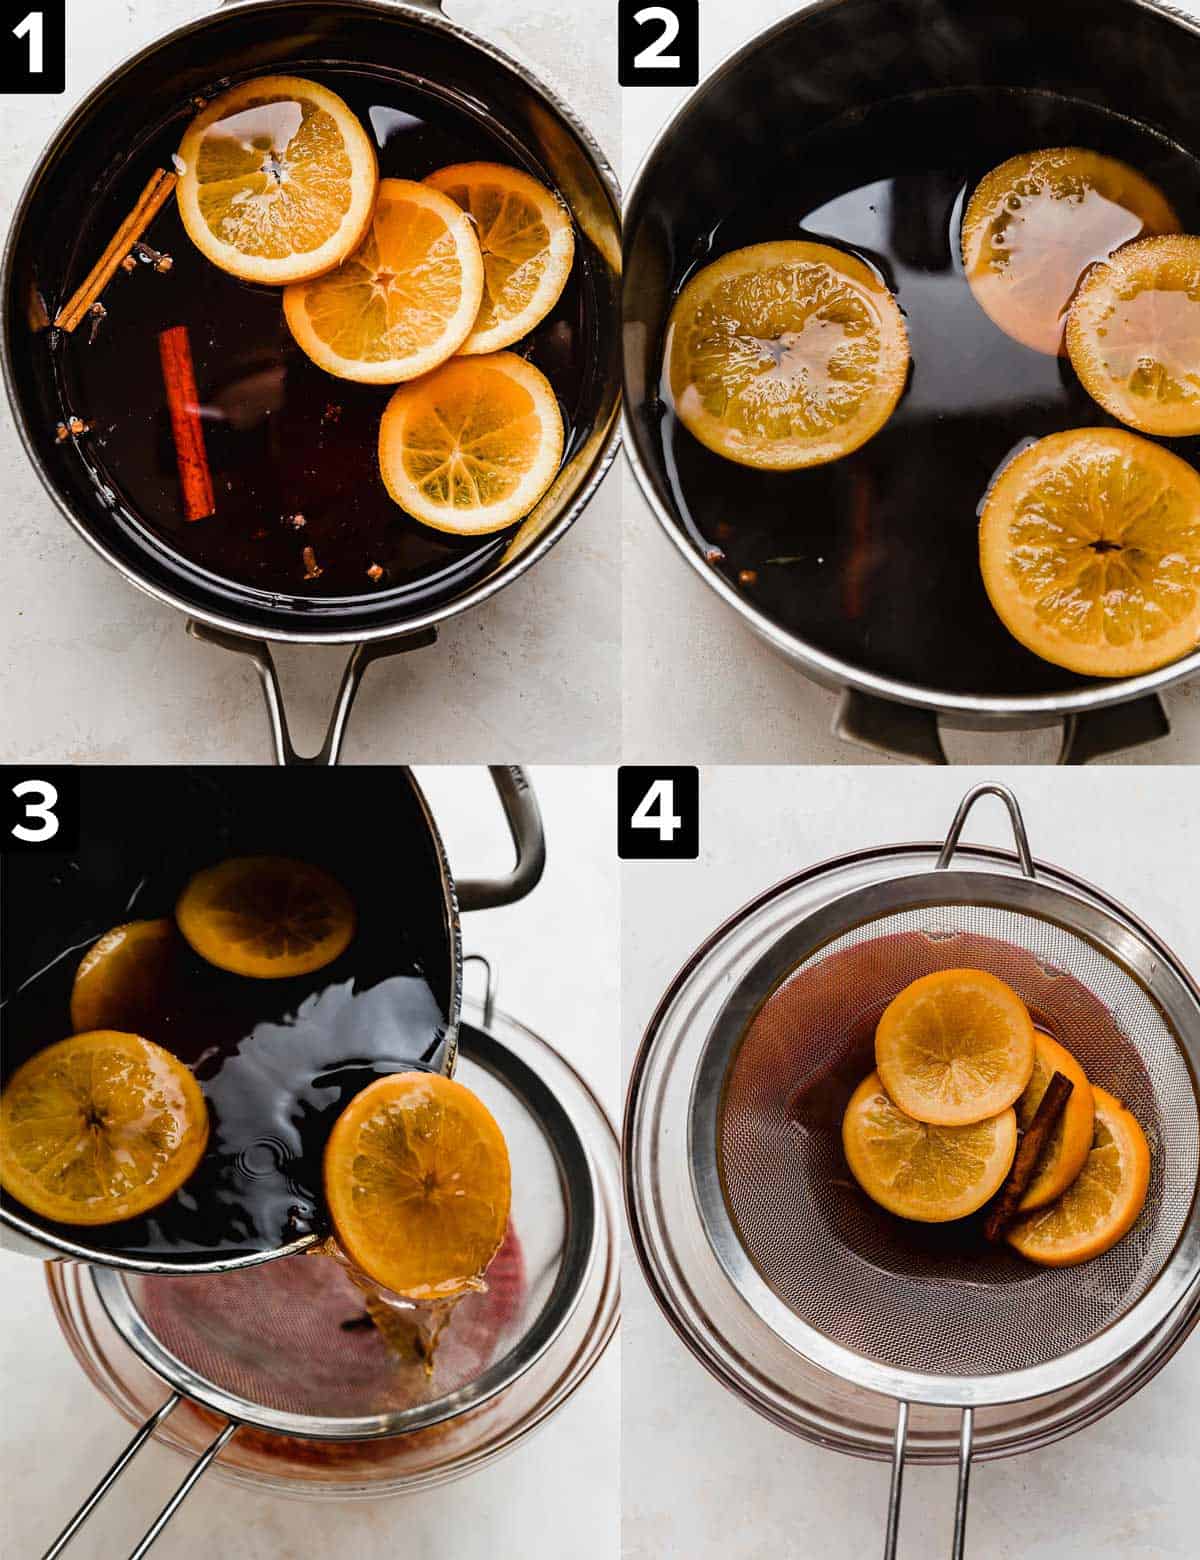 Four photo collage showing the process of how to make Cranberry Apple Cider; ingredients are added to a pot, simmered, then strained through a sieve into a bowl.